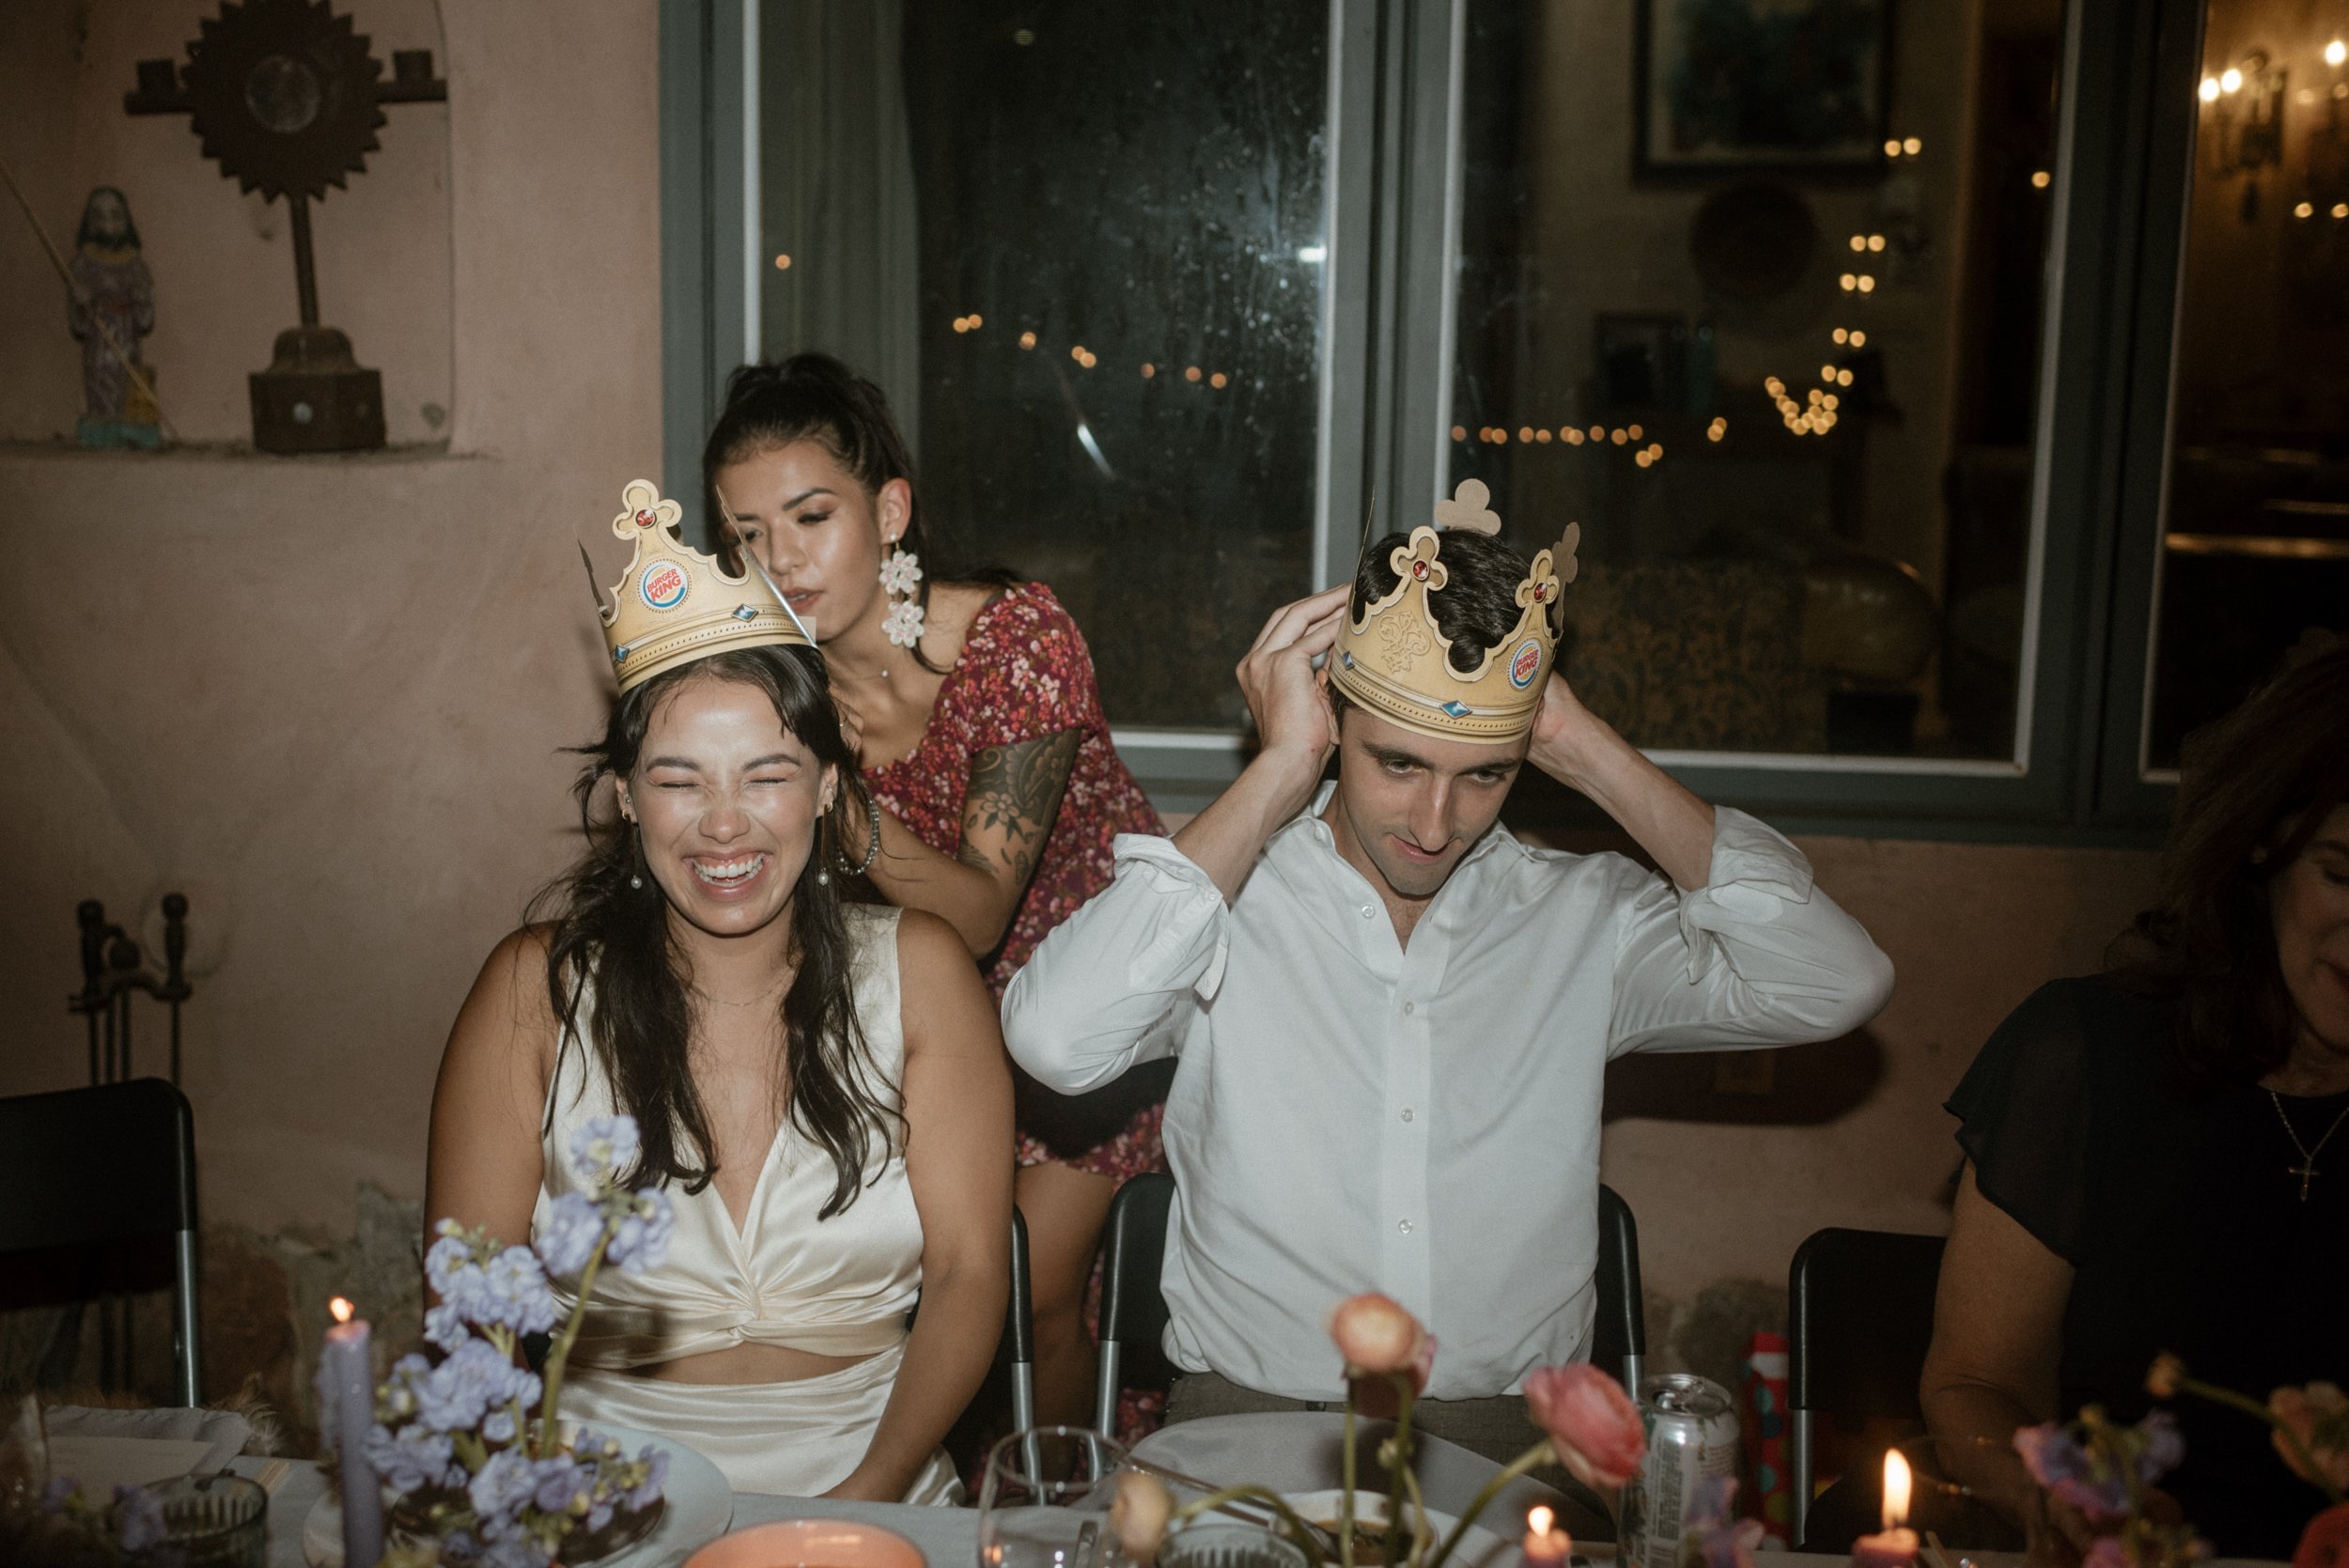 Austin All-Inclusive Intimate Wedding Photography Packages